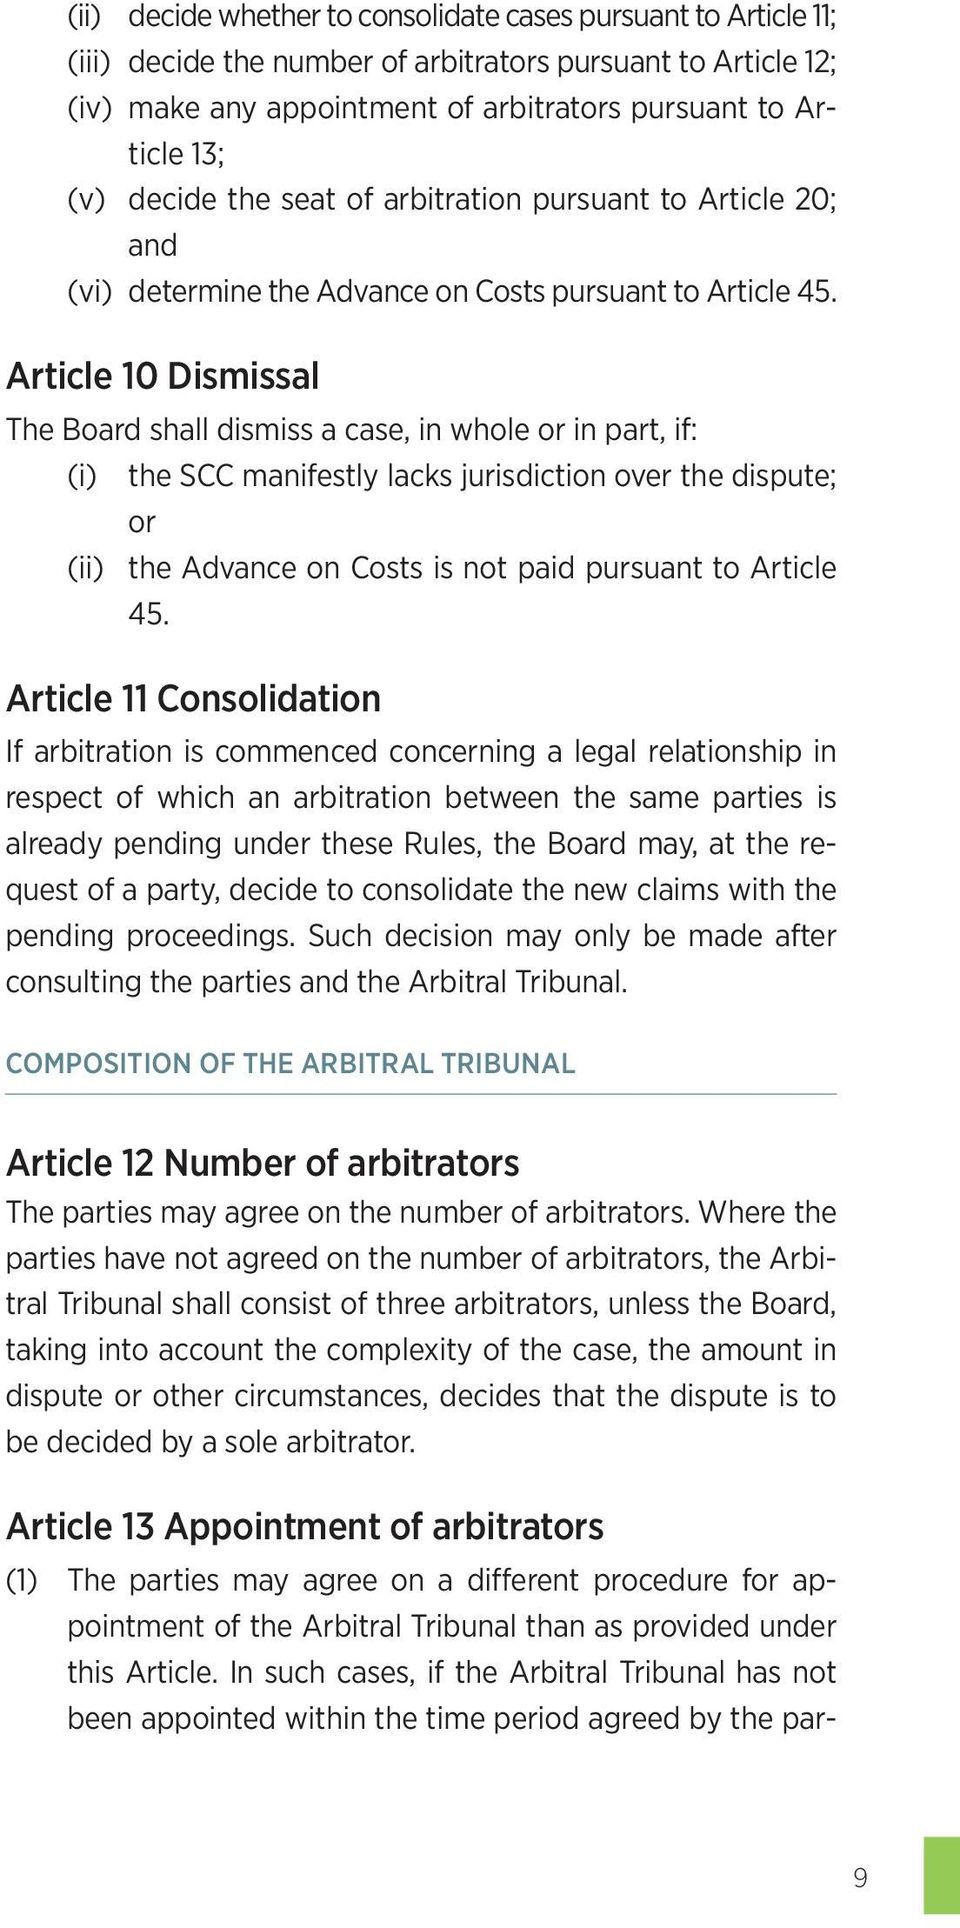 Article 10 Dismissal The Board shall dismiss a case, in whole or in part, if: (i) the SCC manifestly lacks jurisdiction over the dispute; or (ii) the Advance on Costs is not paid pursuant to Article